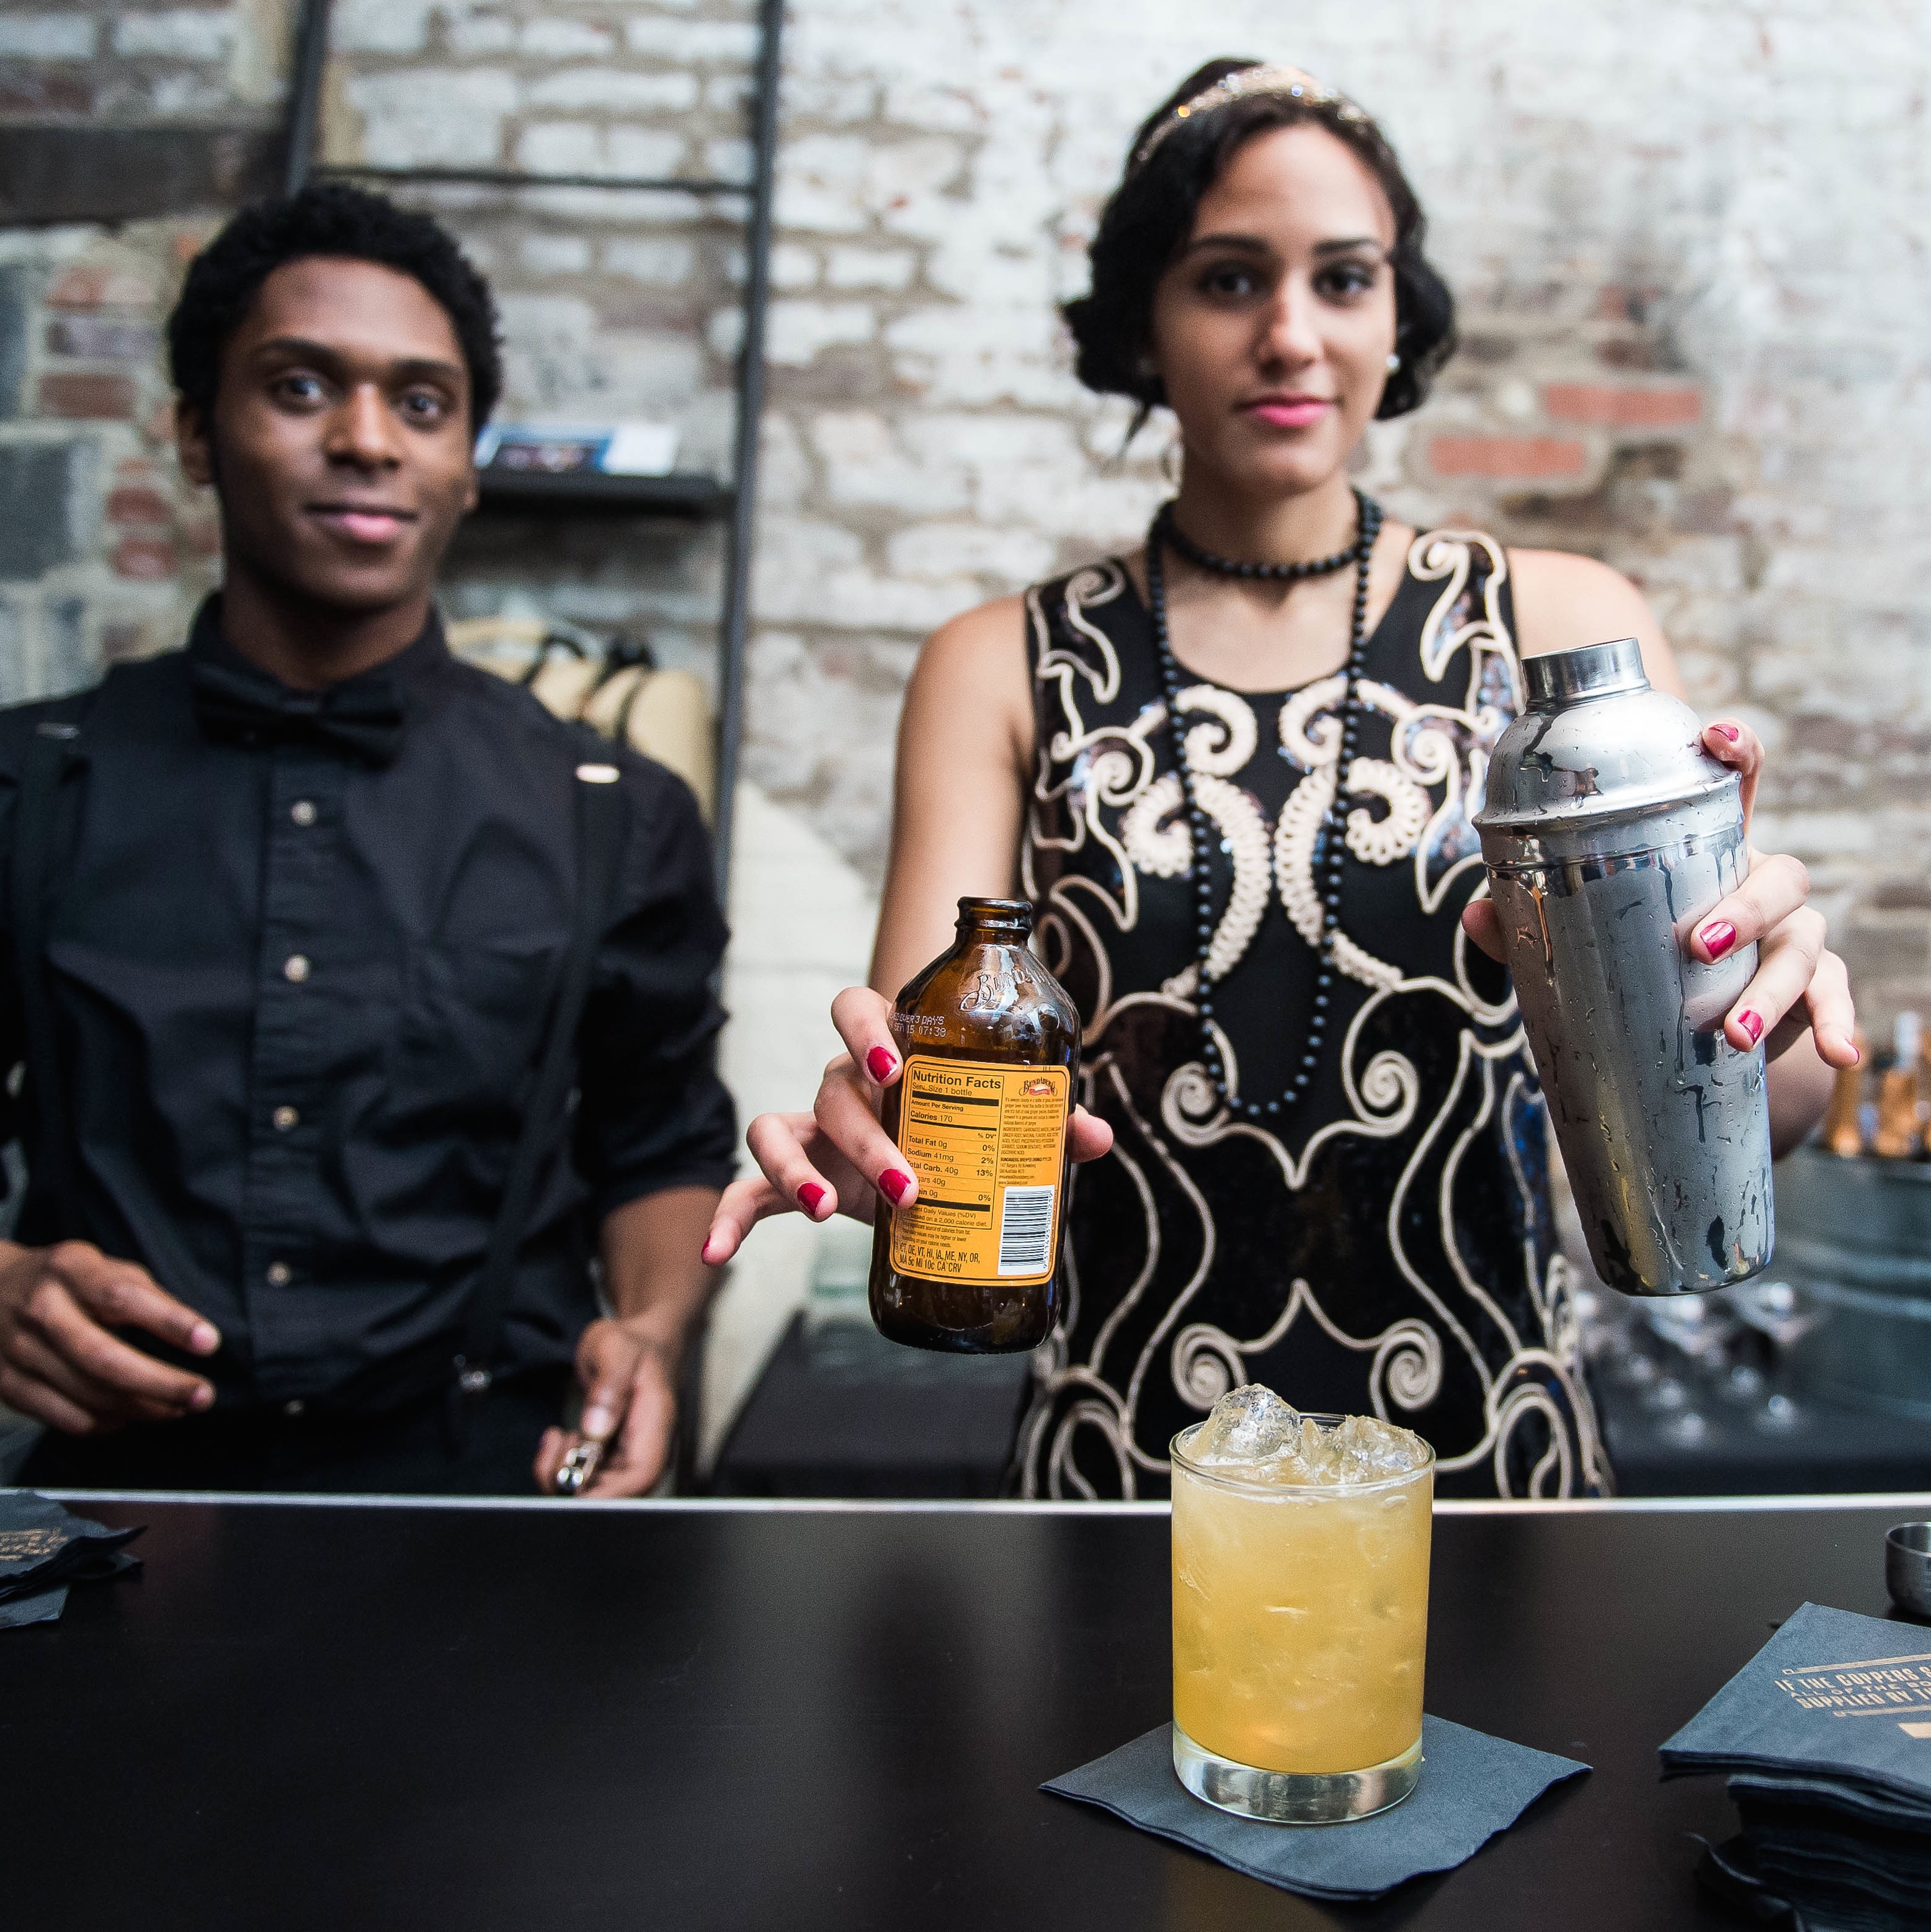 HOW TO HOST AN AMAZING SPEAKEASY PARTY IN 25 EASY STEPS